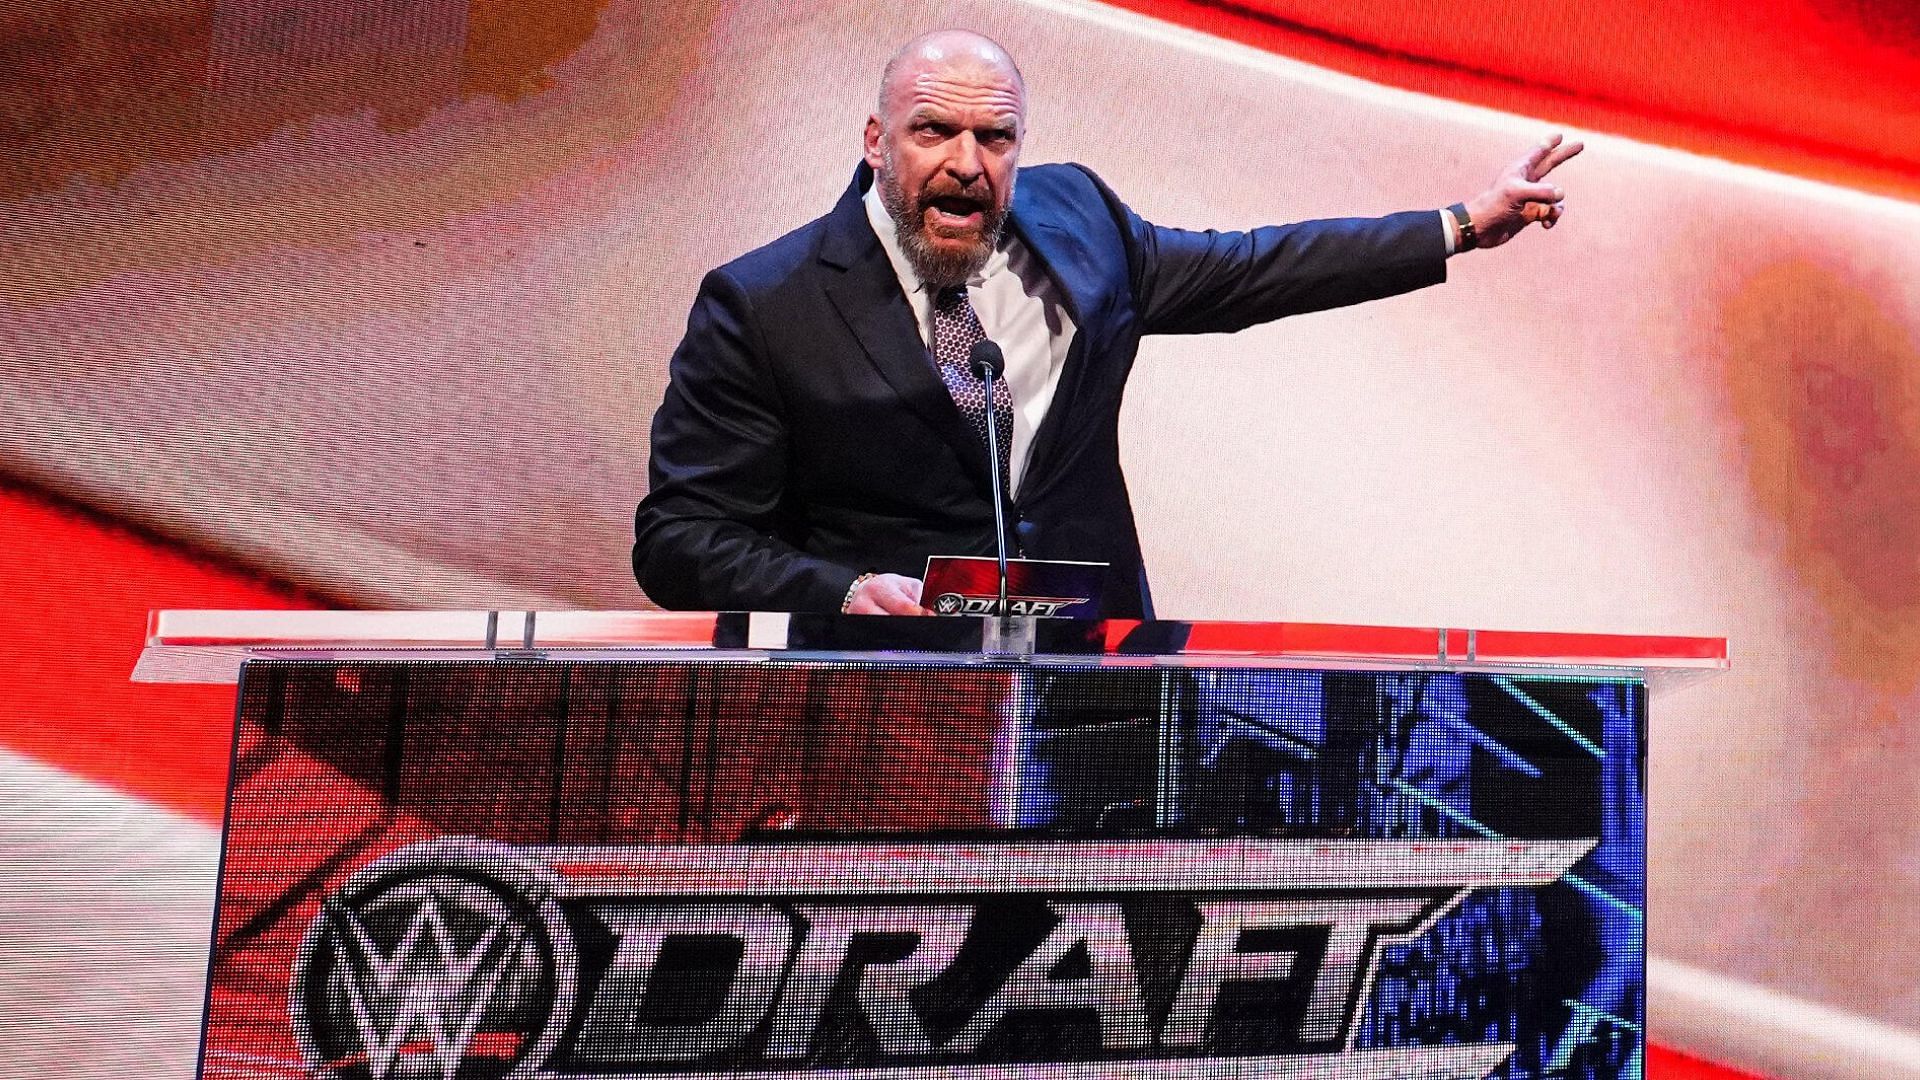 Triple H on SmackDown during the annual WWE Draft!